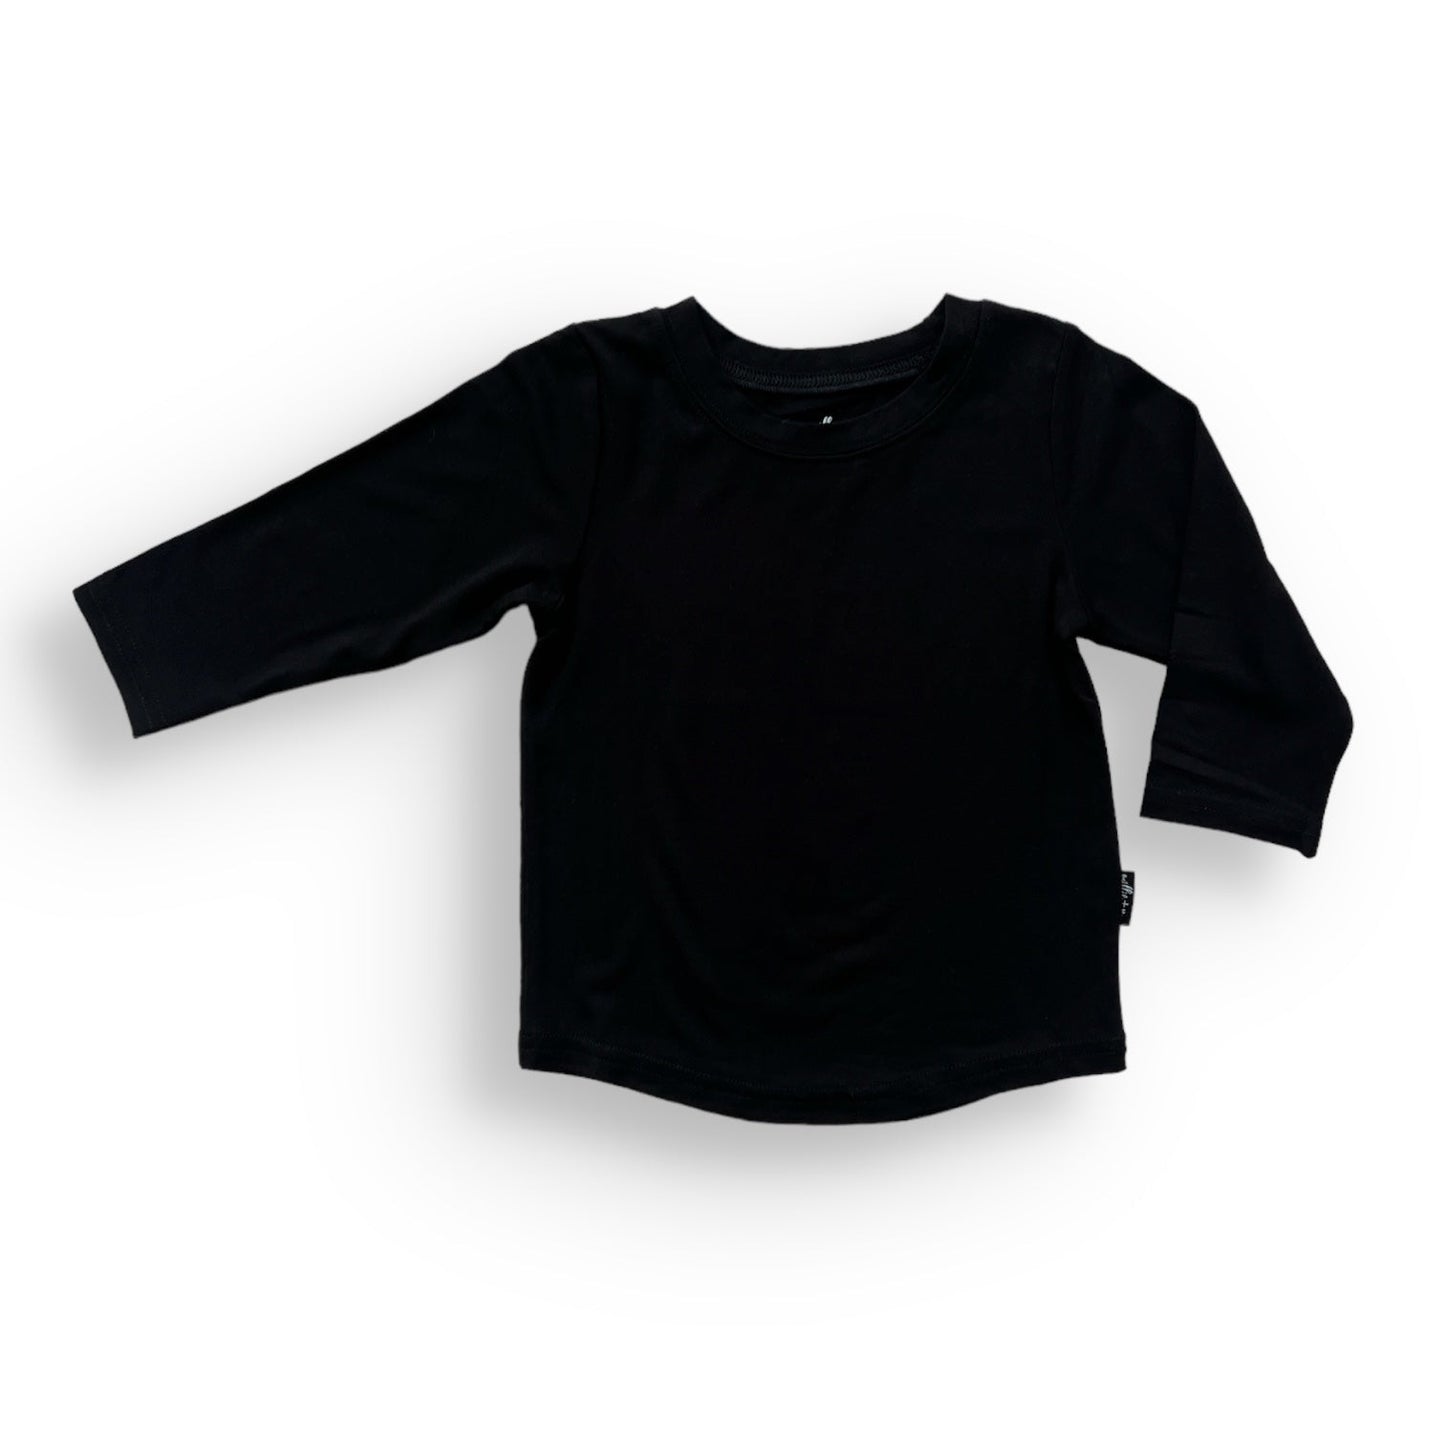 Morgan's Midnight Bamboo Long Sleeve Tee Tea for Three: A Children's Boutique